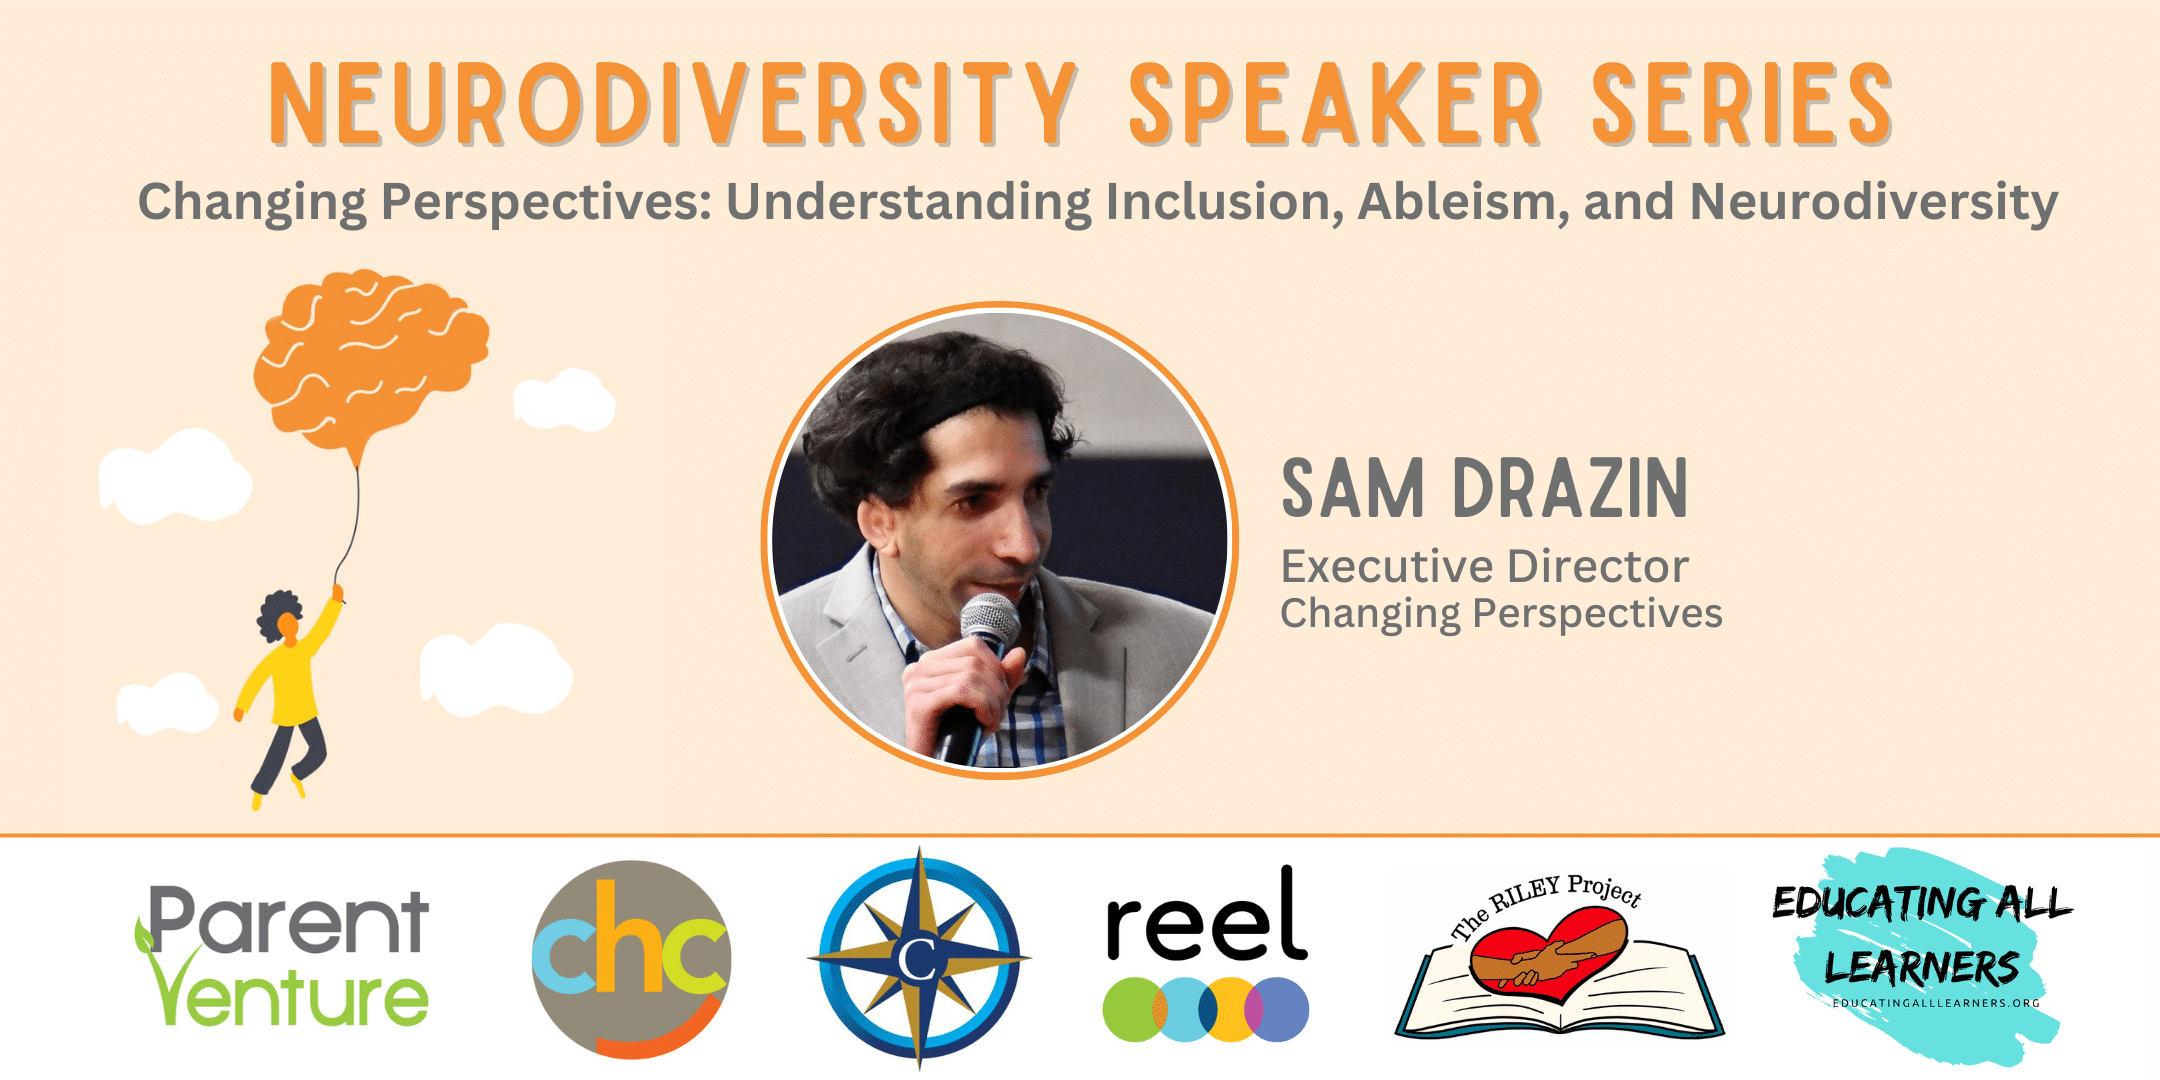 Changing Perspectives: Understanding Inclusion, Ableism, and Neurodiversity Sam Drazin, Founder and Executive Director, Changing Perspectives